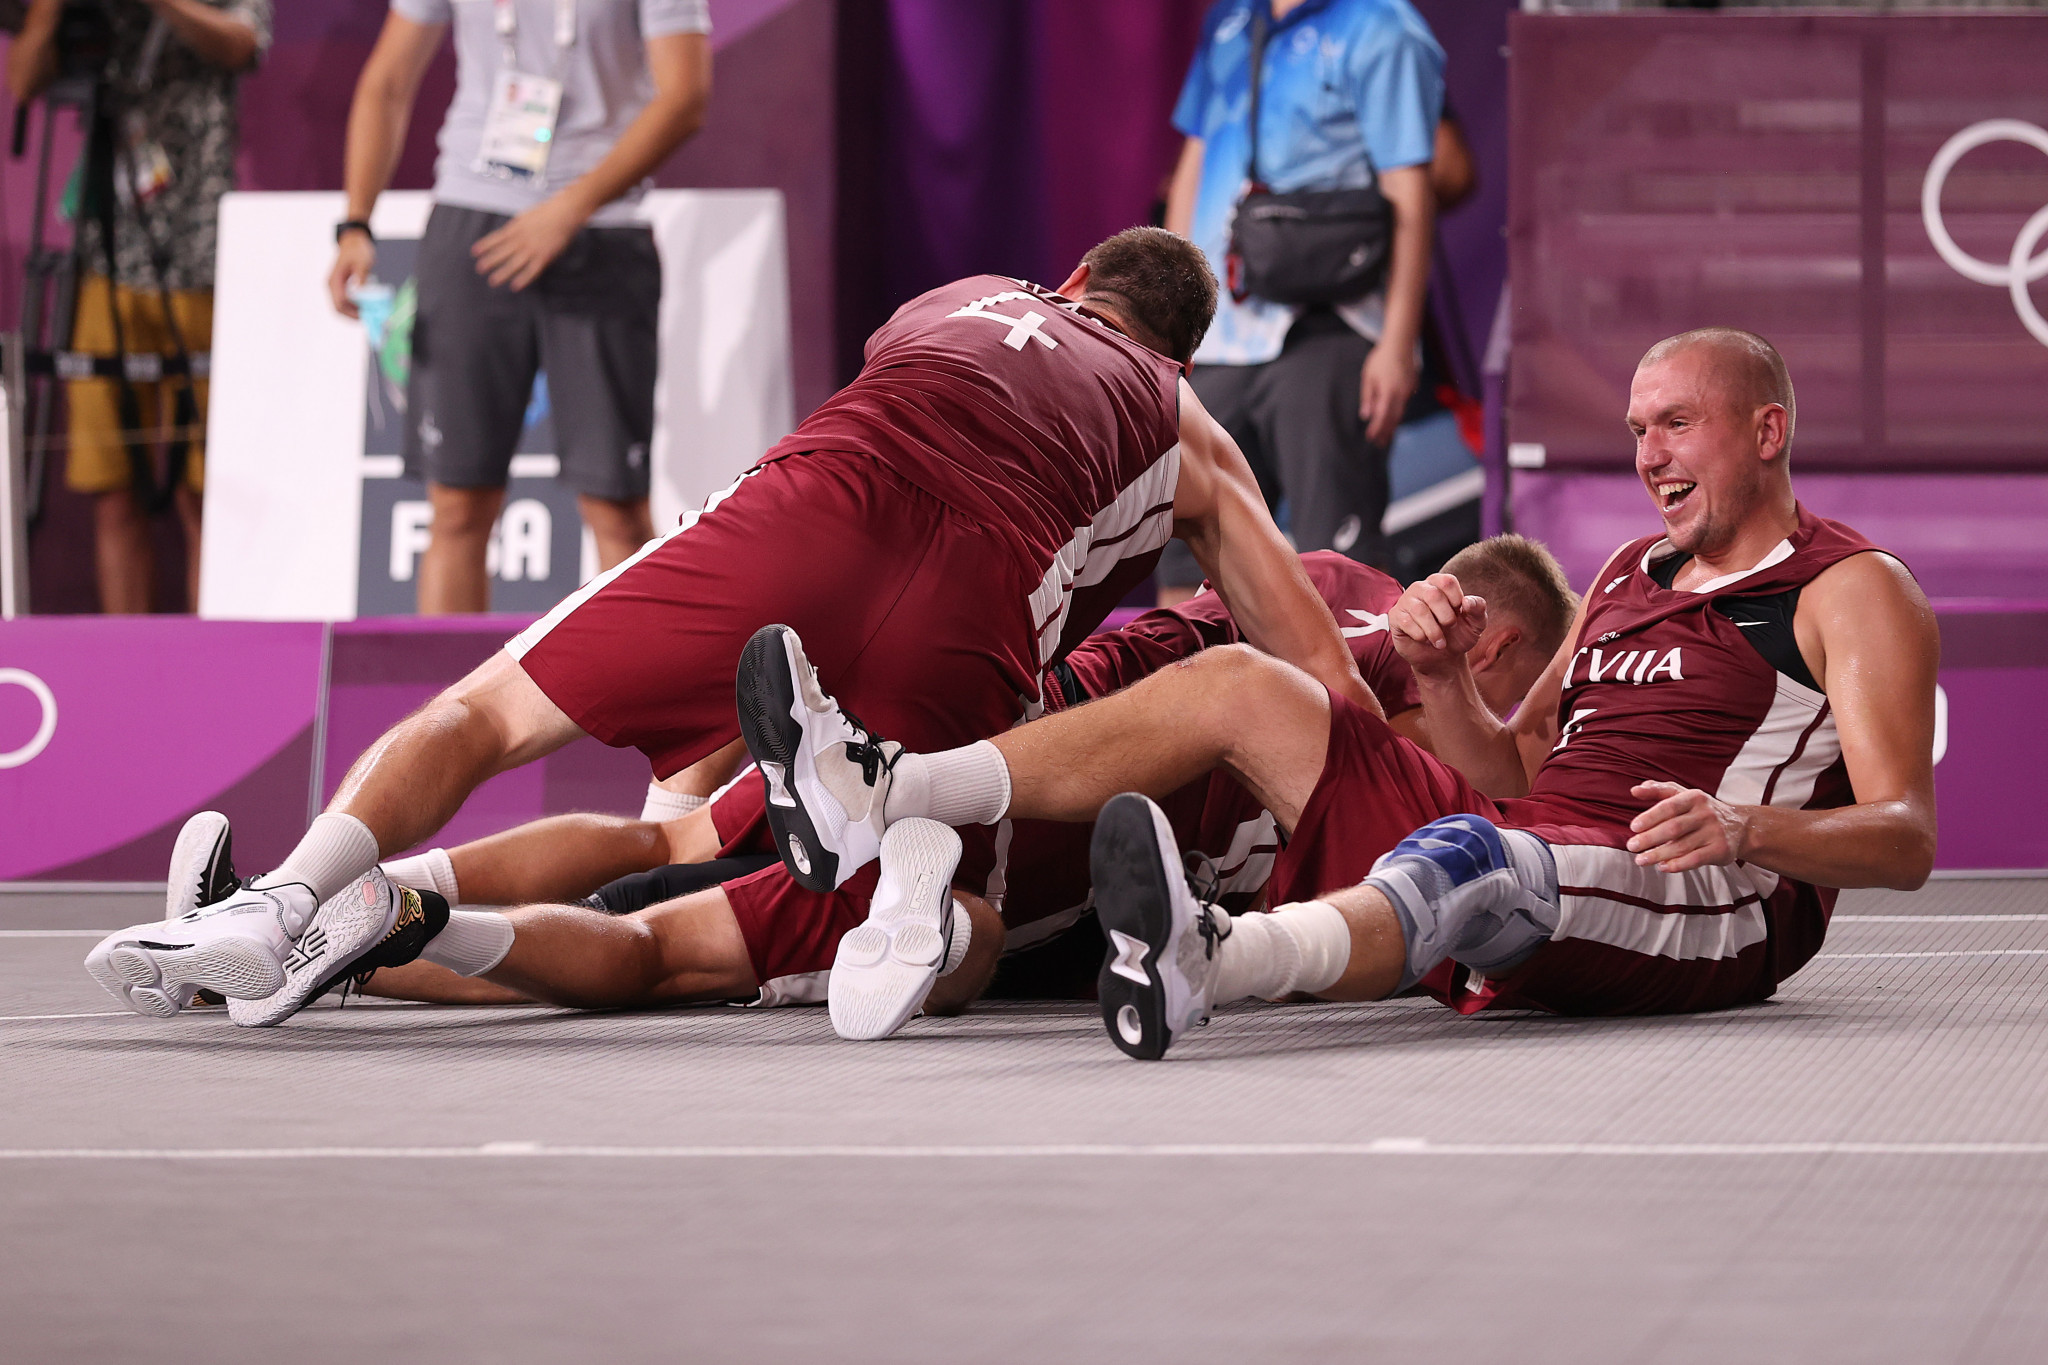 Latvia won men's 3x3 basketball gold at Tokyo 2020, but the LBS has been forced to deny LOK President Žoržs Tikmers's suggestion it had led a 